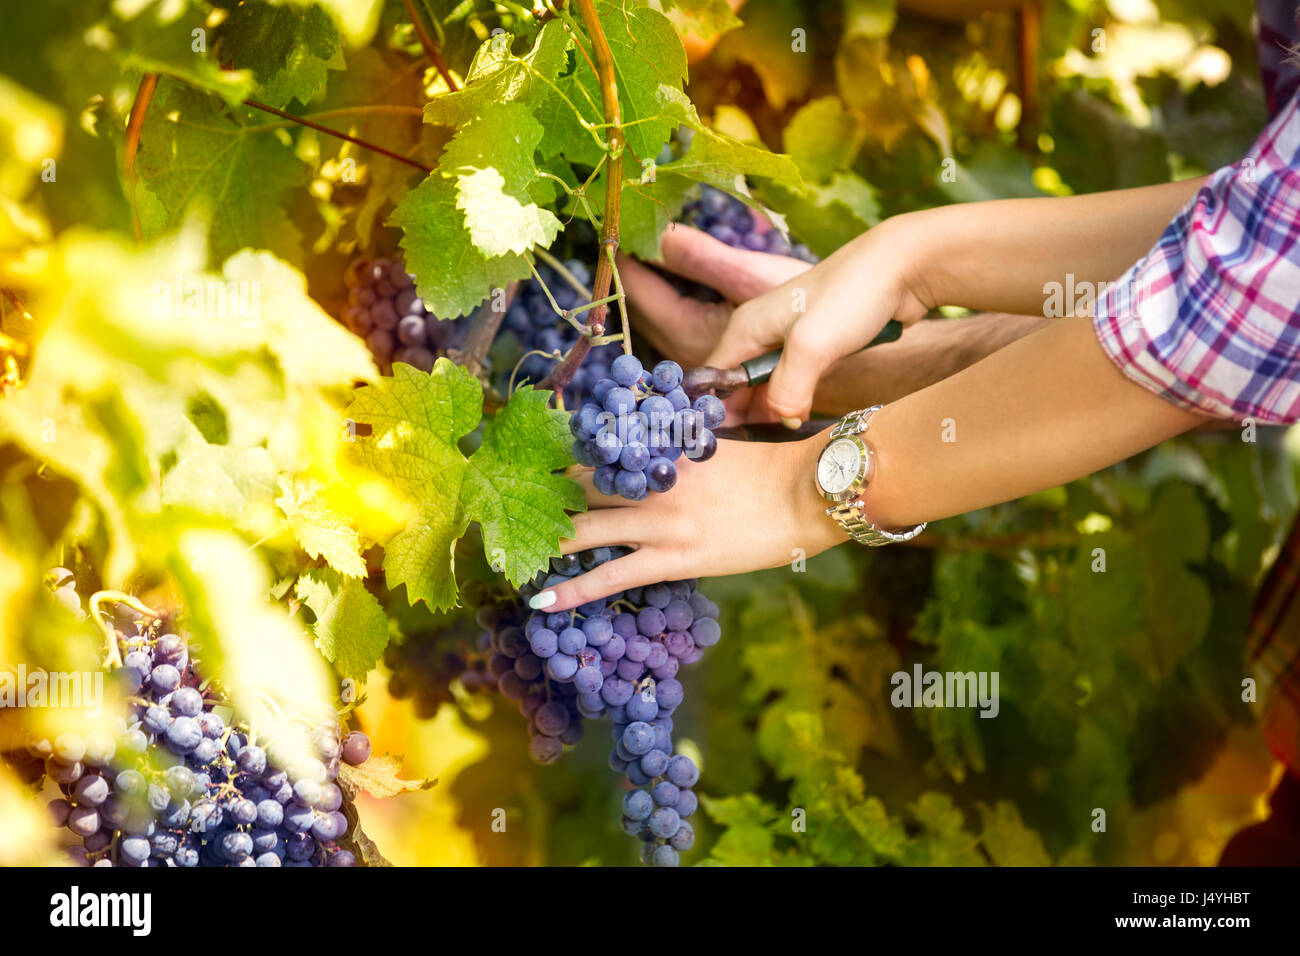 Winemaker woman picking grapes at harvest time, close up Stock Photo